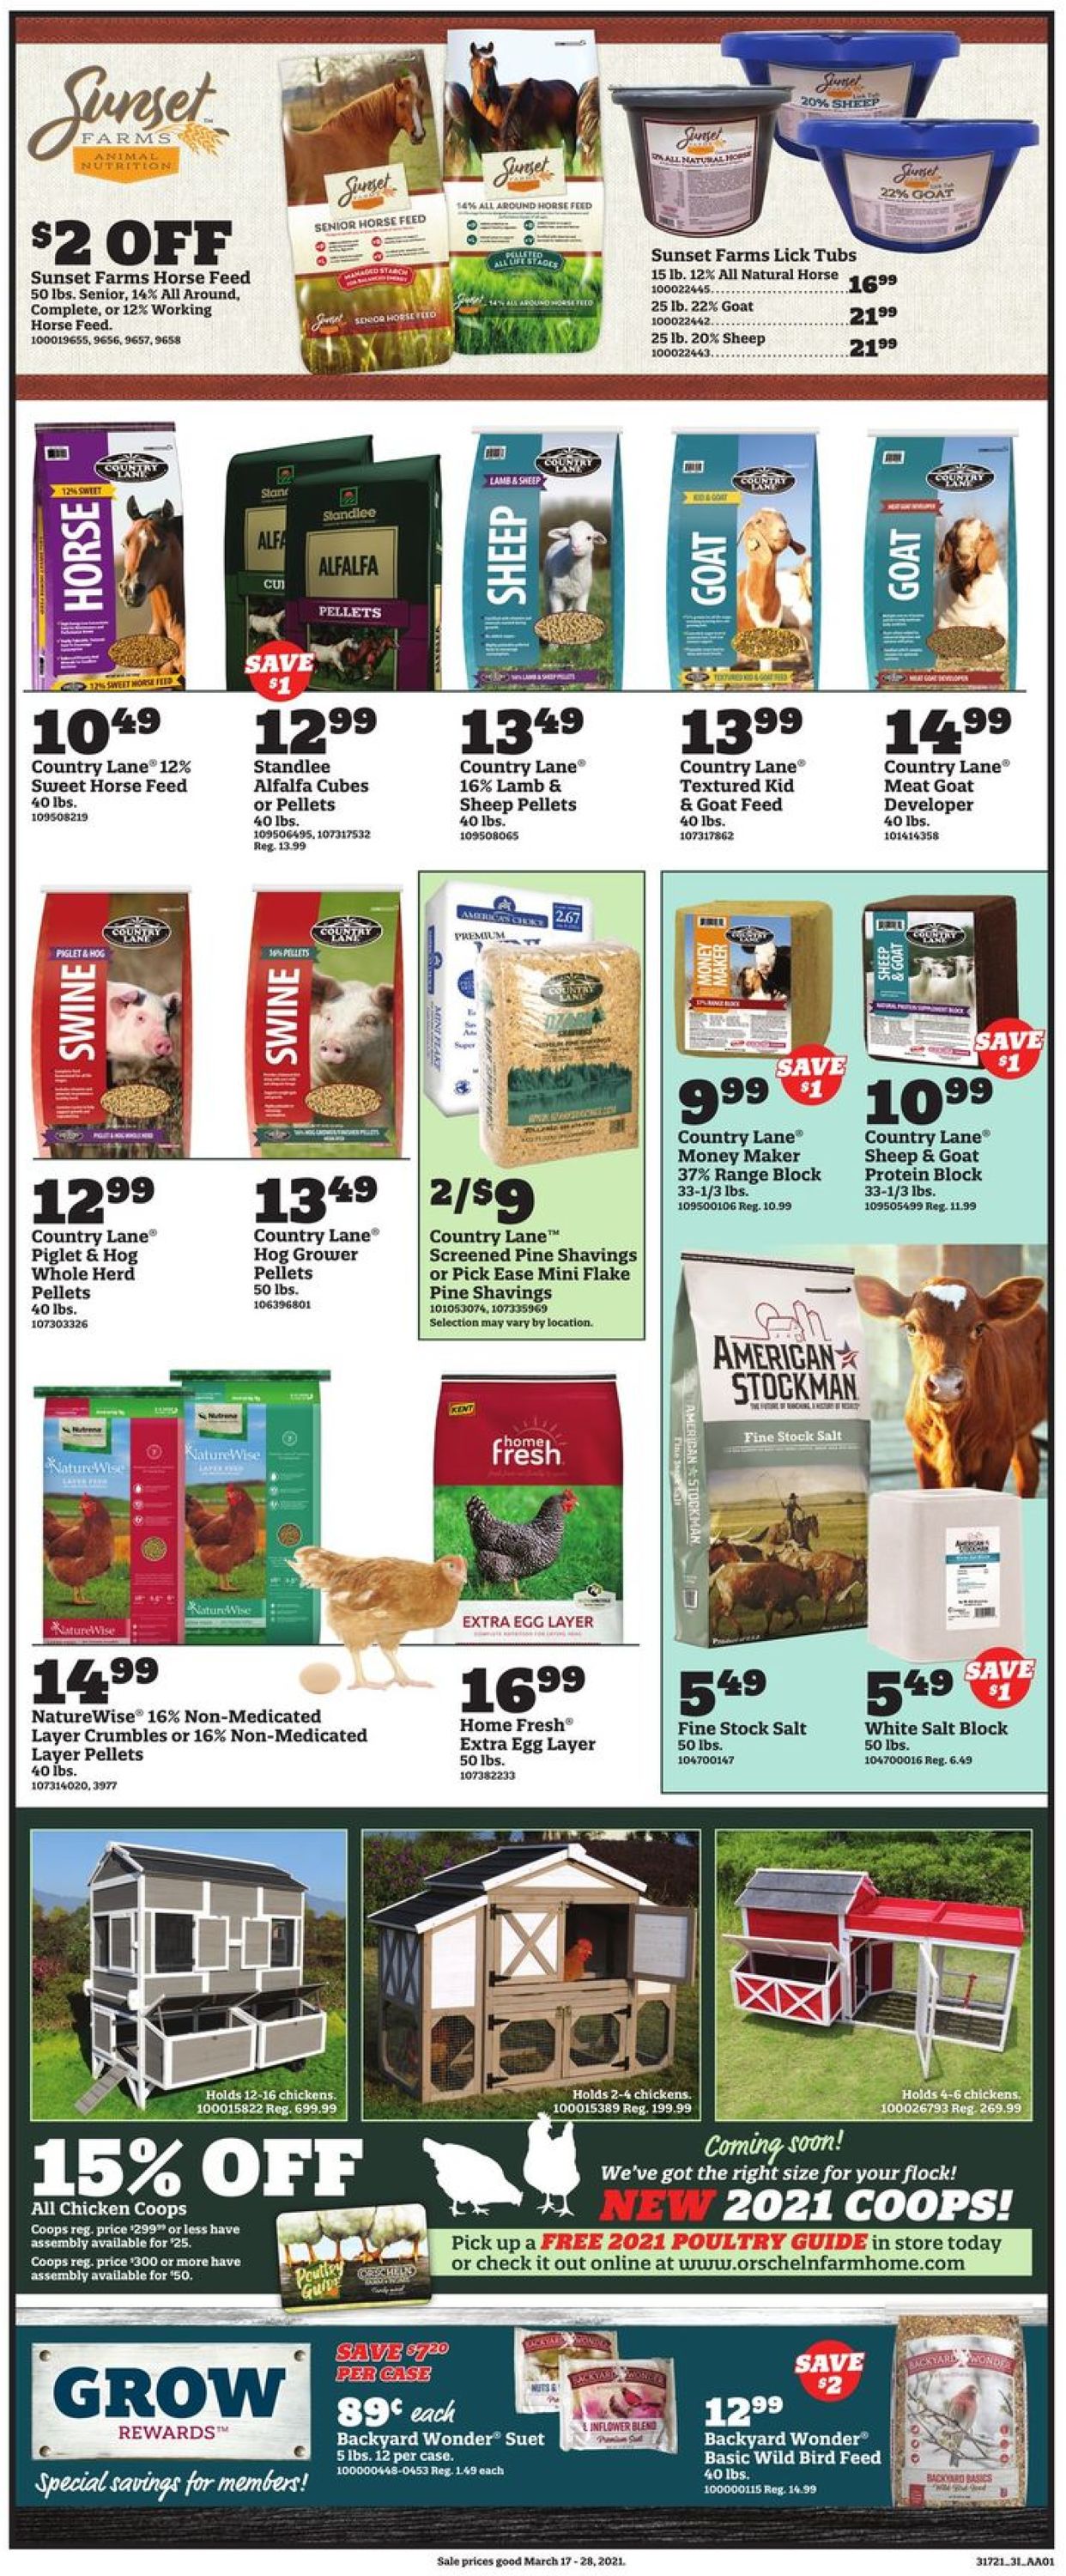 Orscheln Farm and Home Weekly Ad Circular - valid 03/17-03/28/2021 (Page 4)